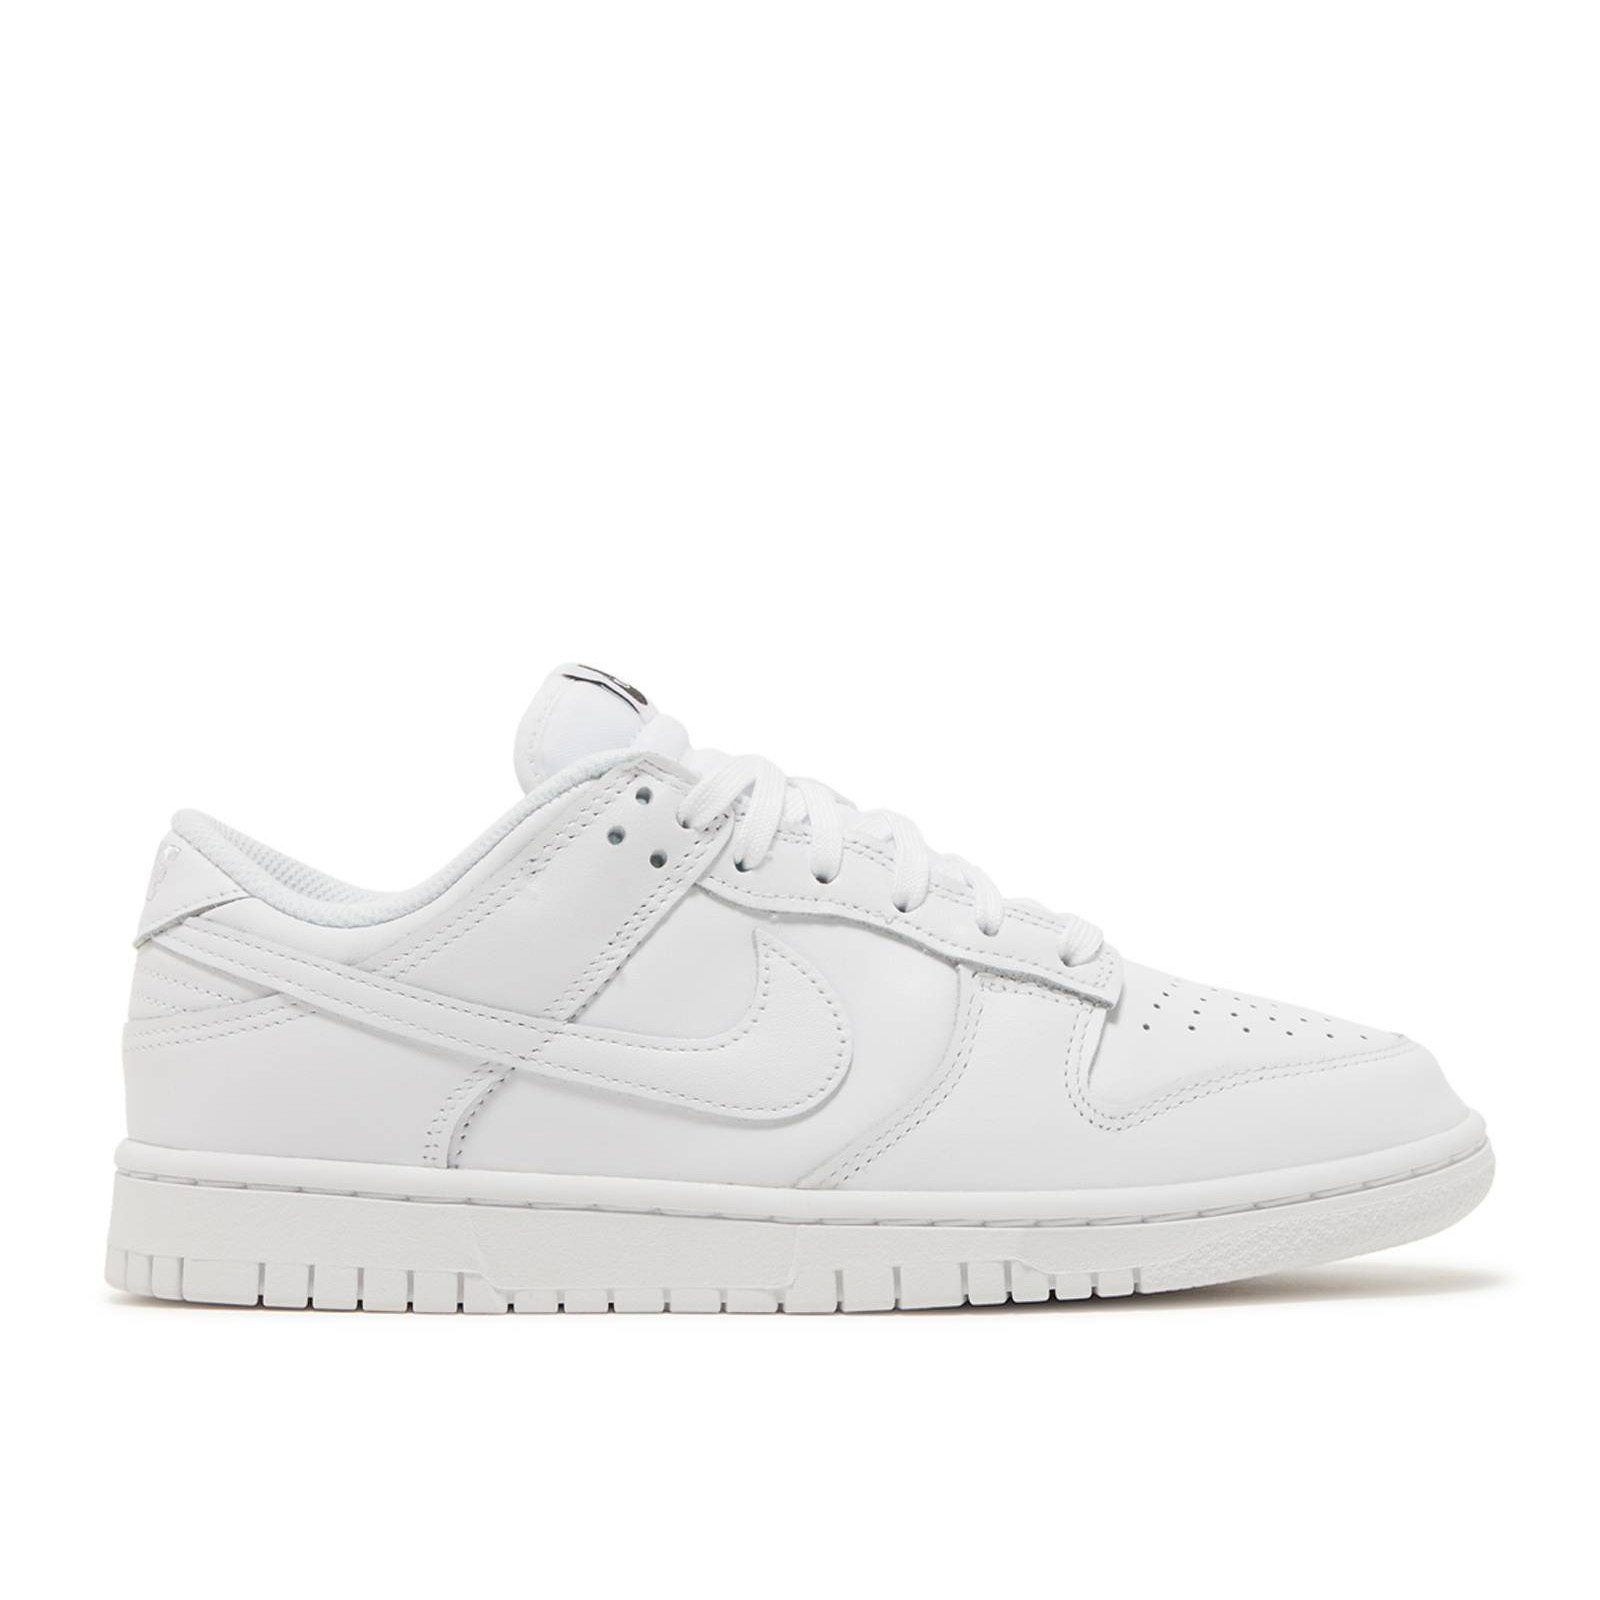 Buy Women's Nike Air Force Other Size Shoes New Sneakers, 56% OFF